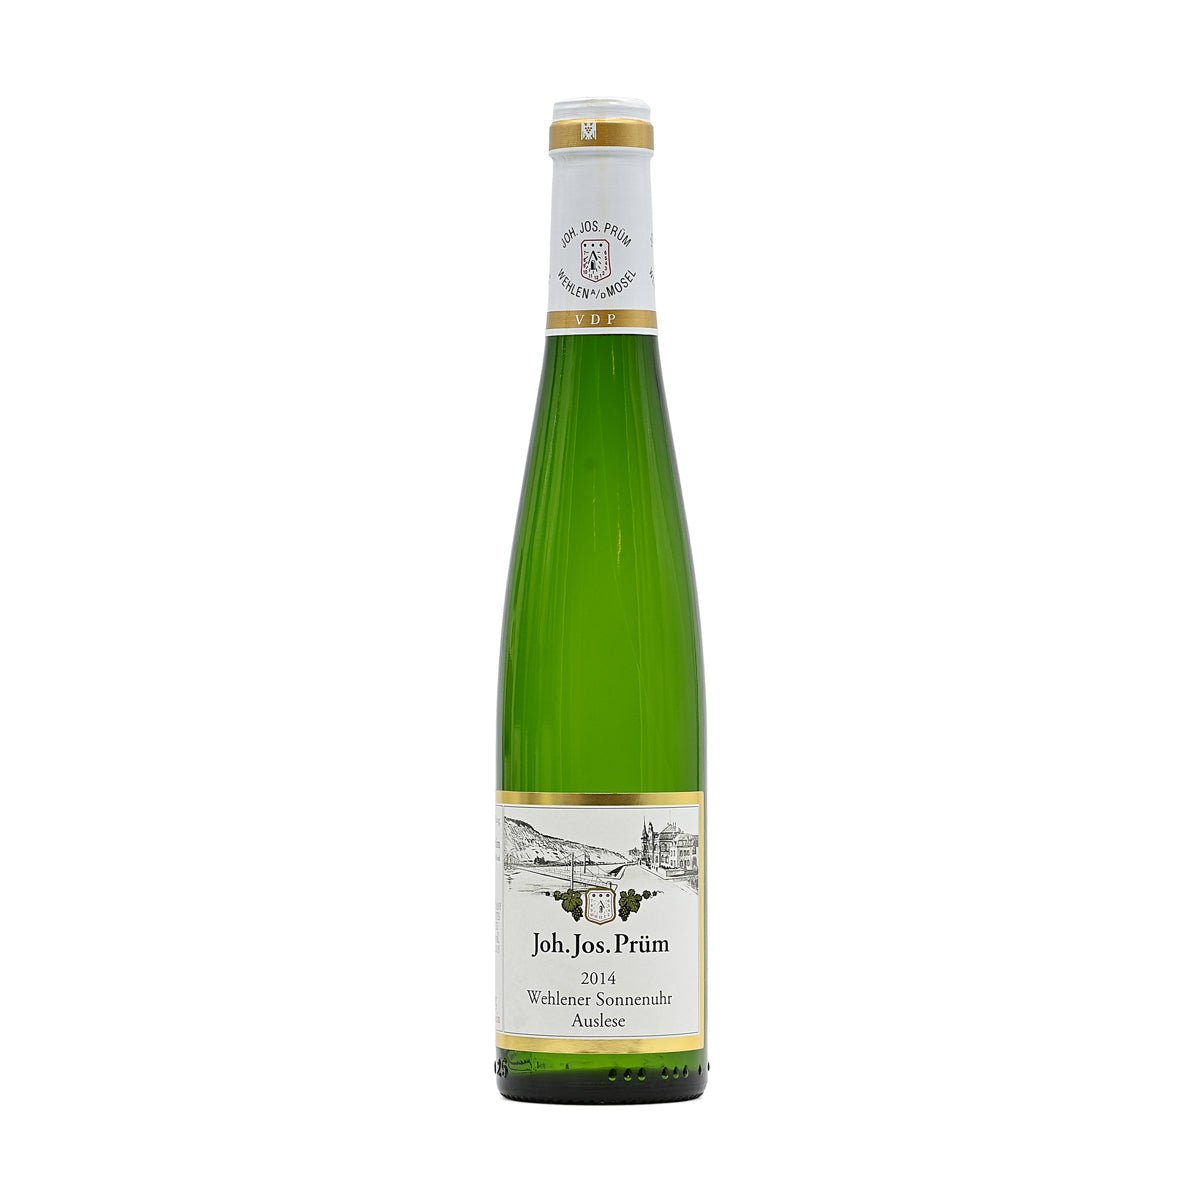 2014 Riesling Wehlener Sonnenuhr Auslese from Weingut Joh. Jos. Prum, in half-bottle size. 375ml German sweet wine, made from Riesling; from Wehlen, Mosel, Germany – GDV Fine Wines, Hong Kong